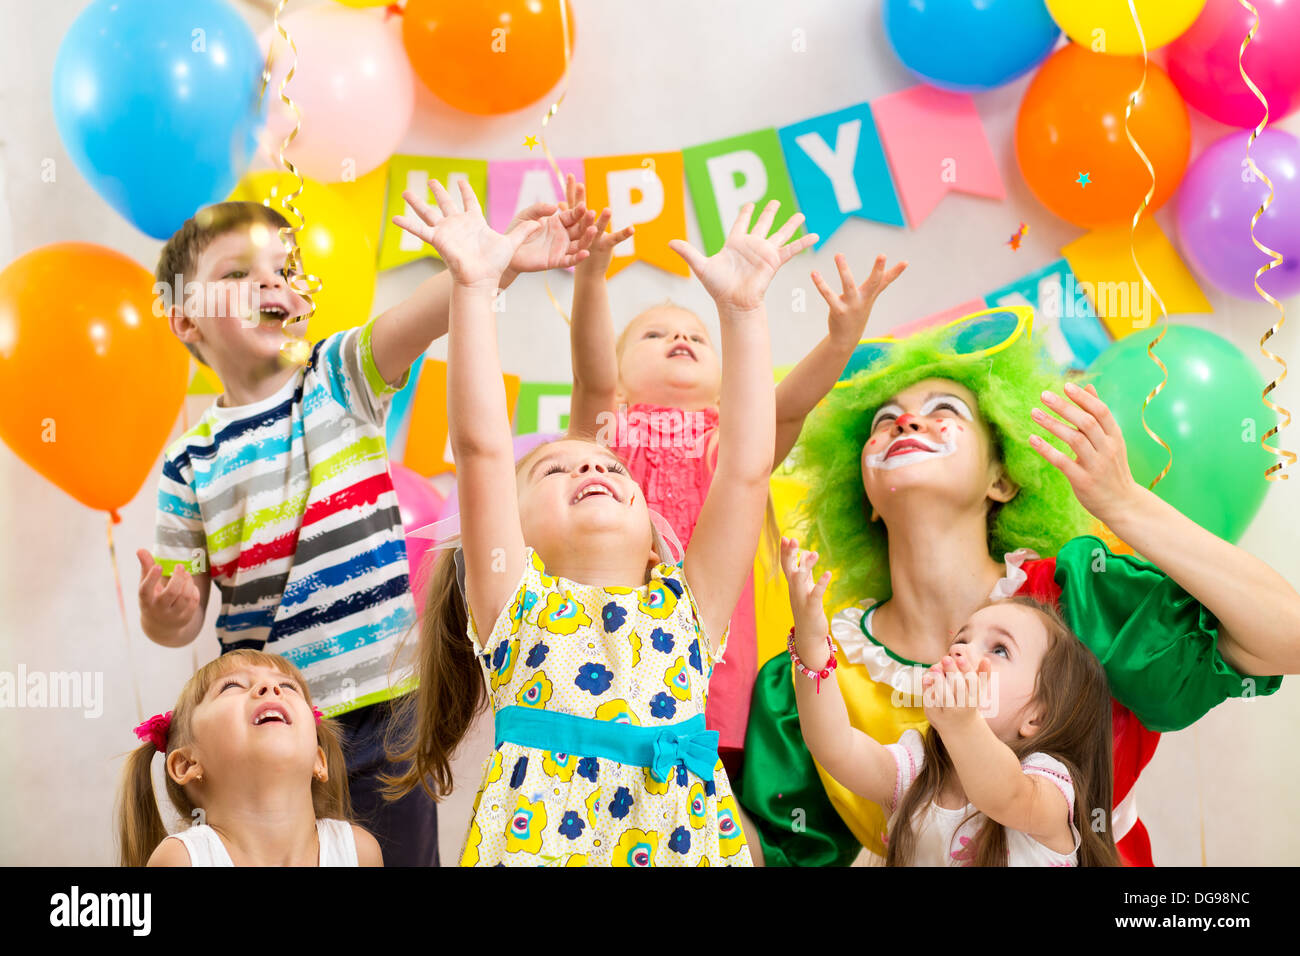 jolly kids group with clown celebrating birthday party Stock Photo